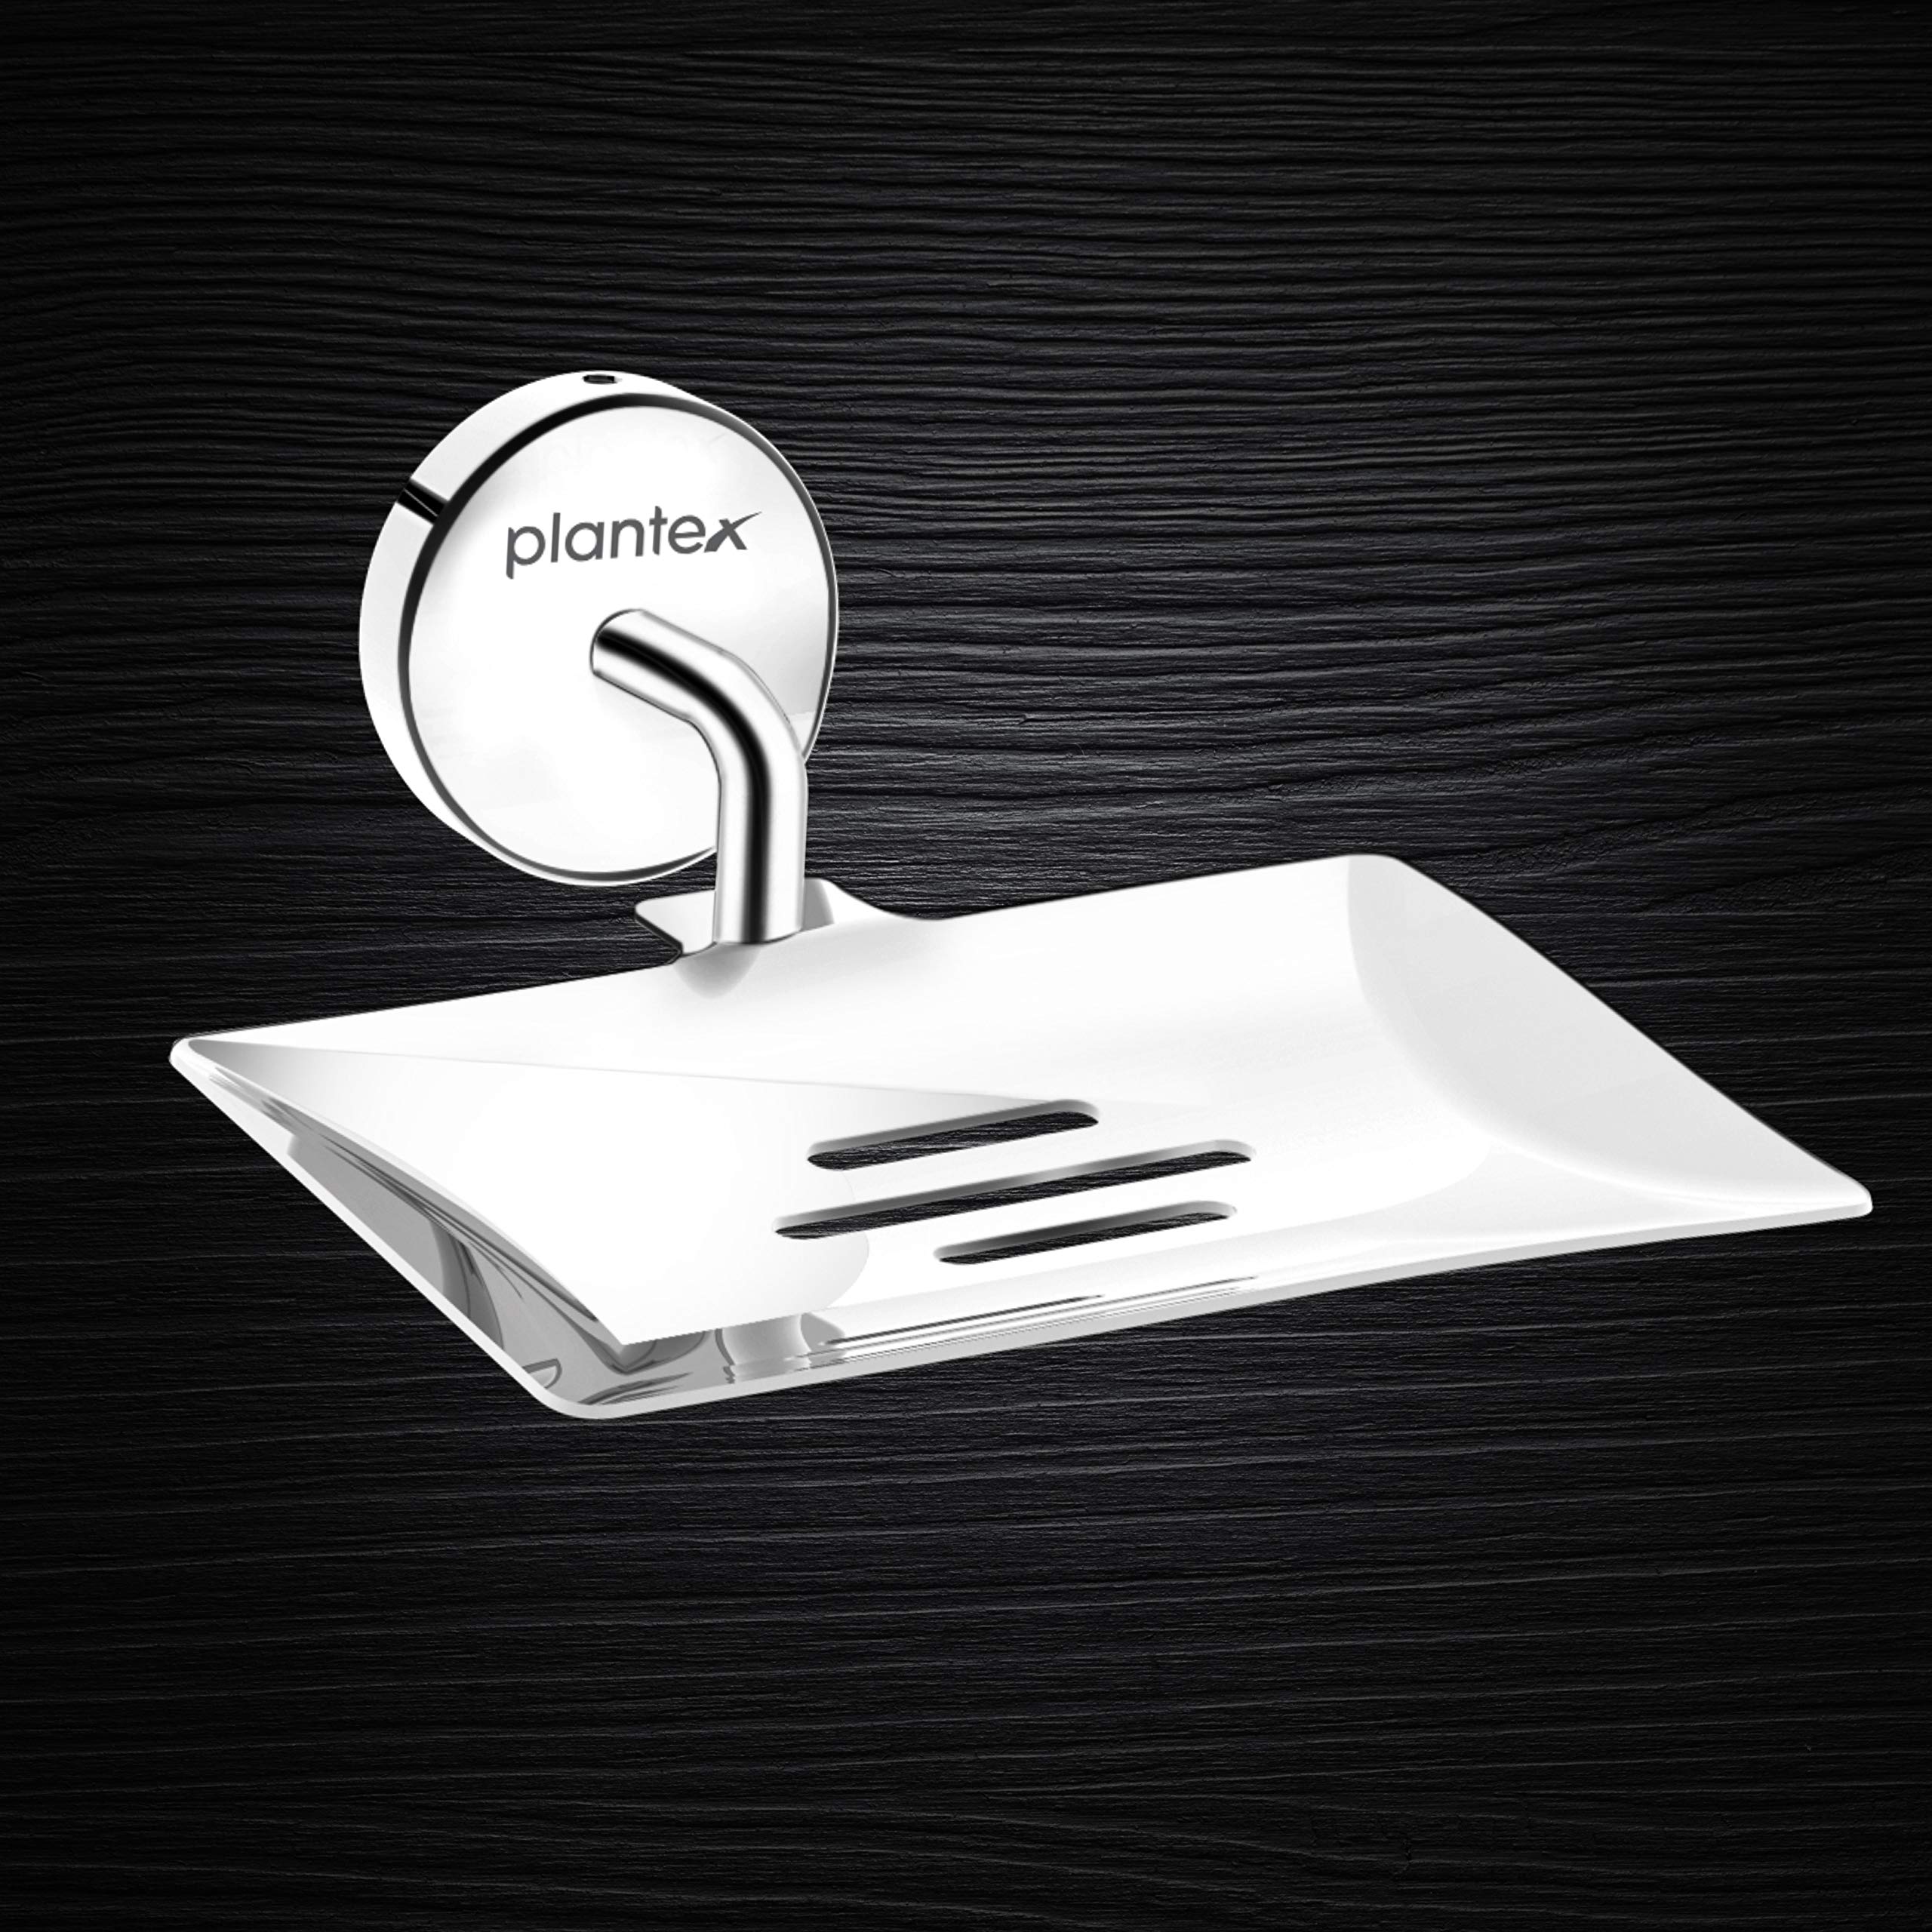 Plantex Brezza Stainless Steel Soap Dish Stand for Bathroom & Kitchen/Soap Dish/Bathroom Accessories - (Chrome) - Pack of 1